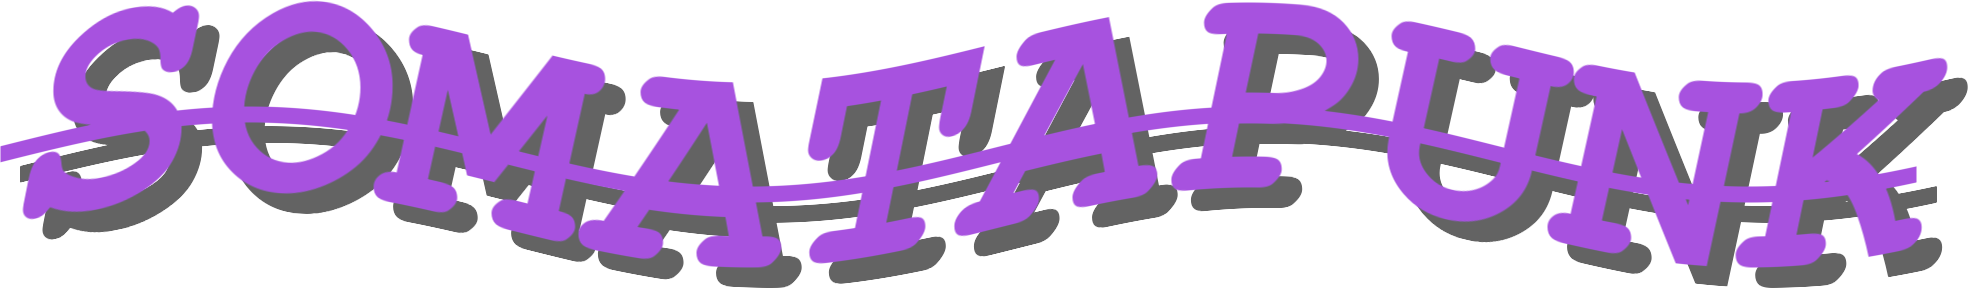 Somatapunk logo, wavy strikethrough purple text with a drop shadow in Courier font.